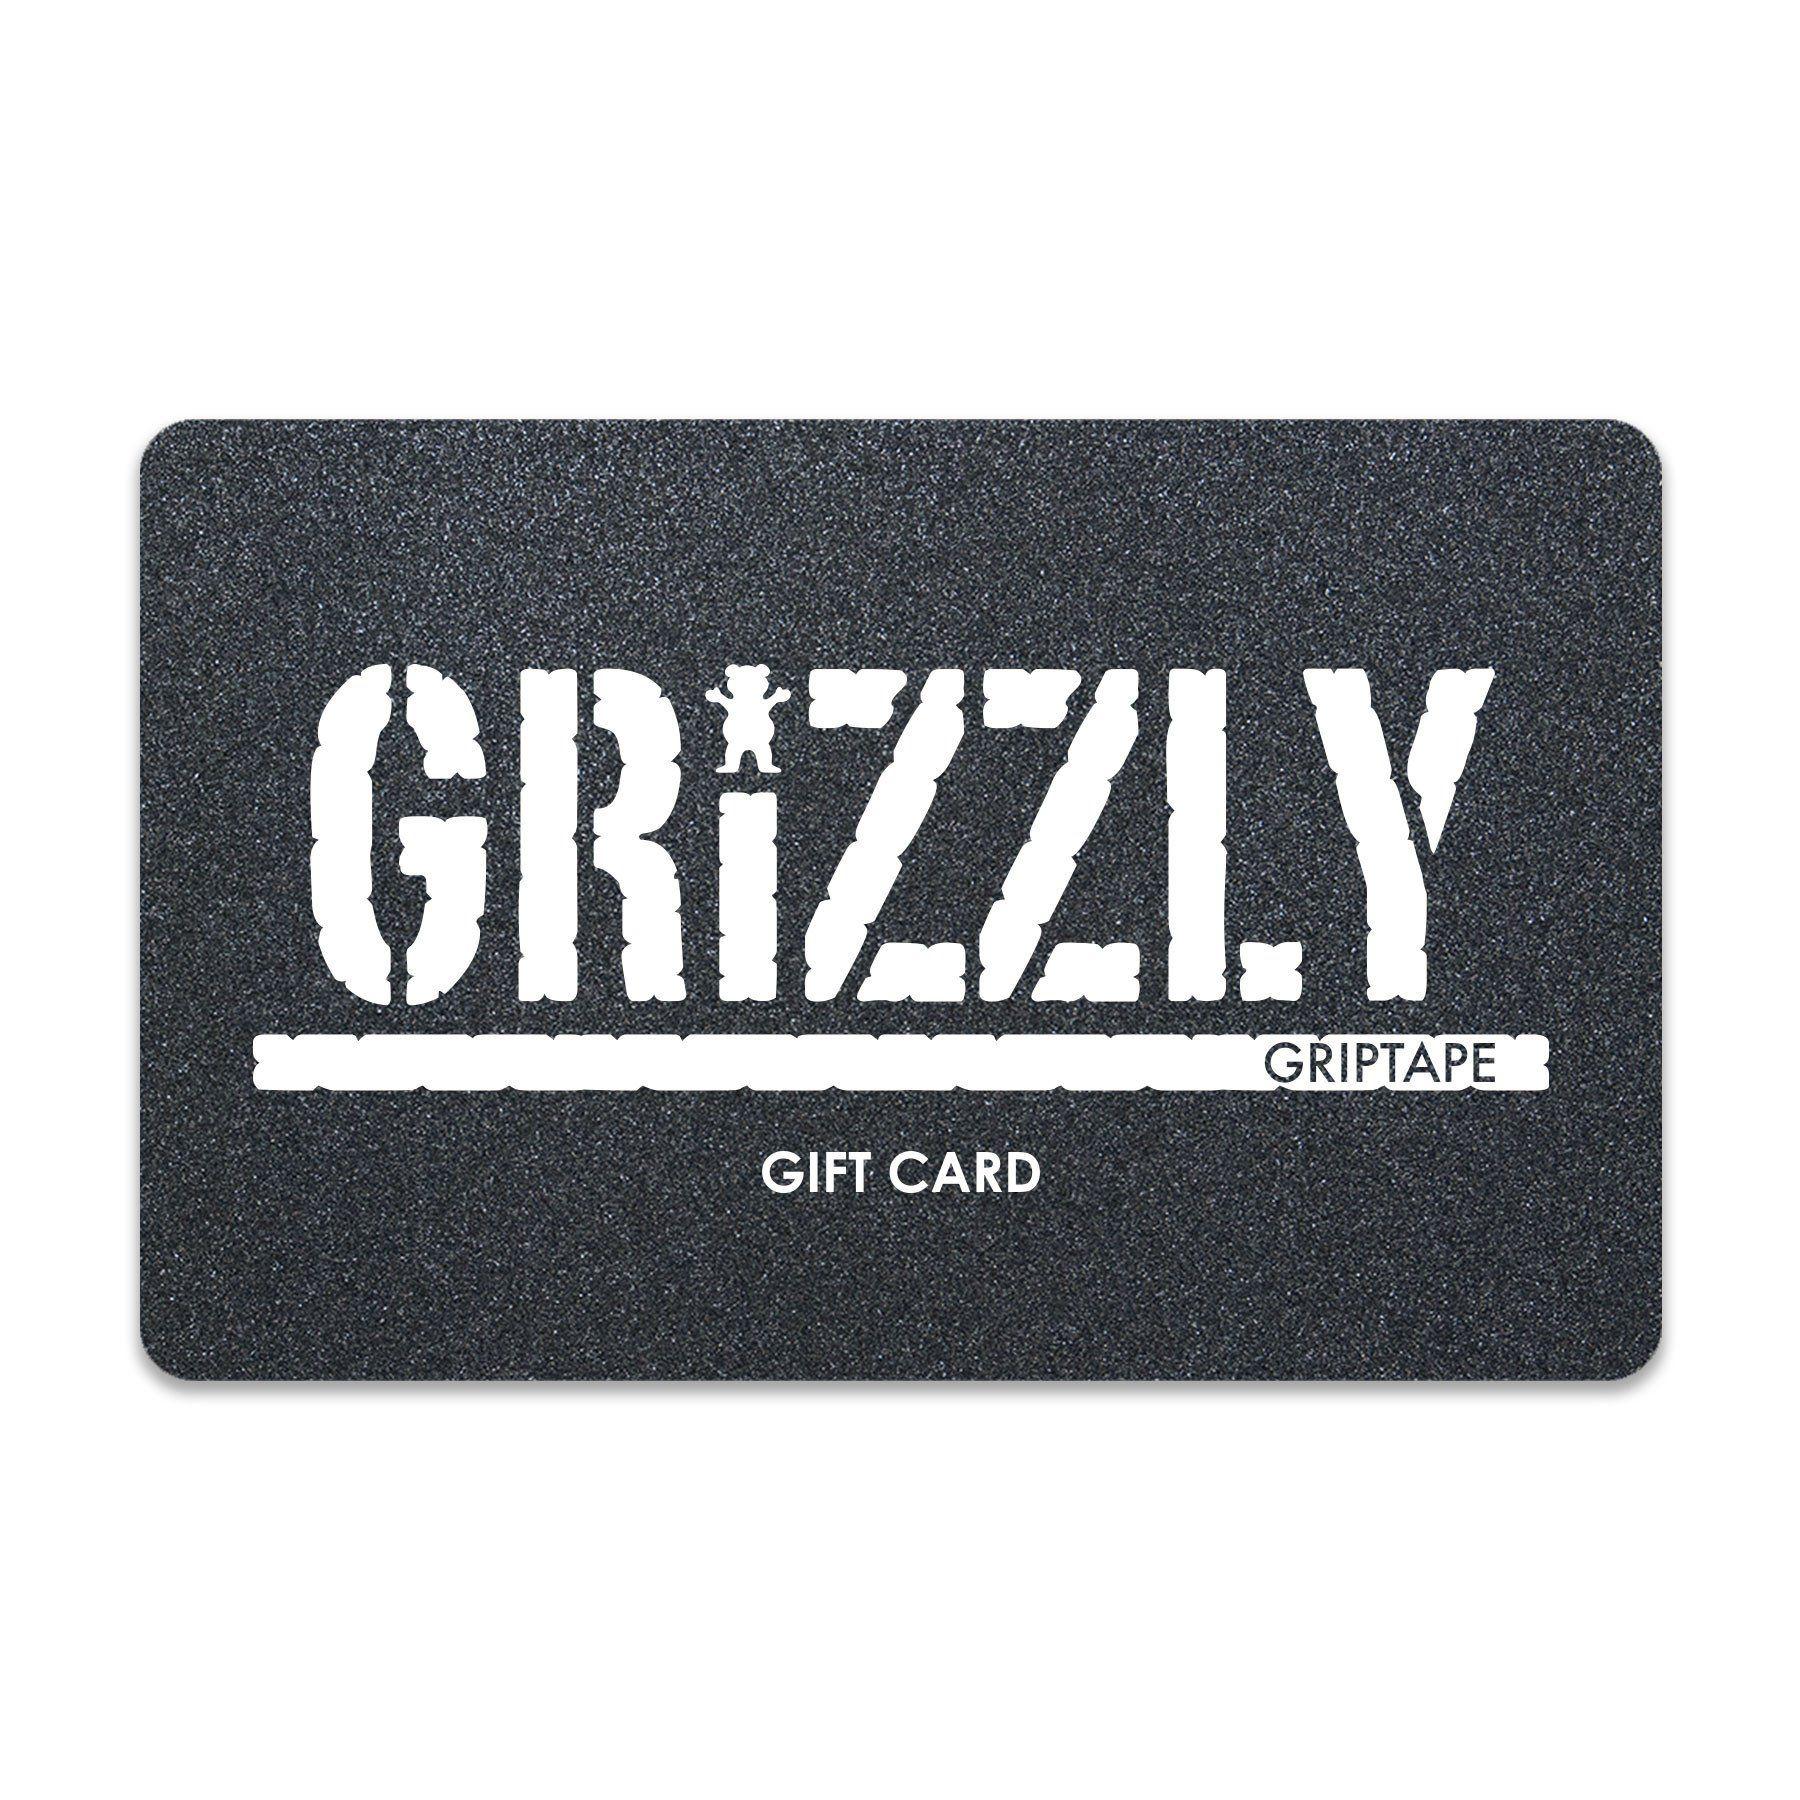 Grizzly Grip Tape Logo - GRIZZLY GRIPTAPE GIFT CARD $50